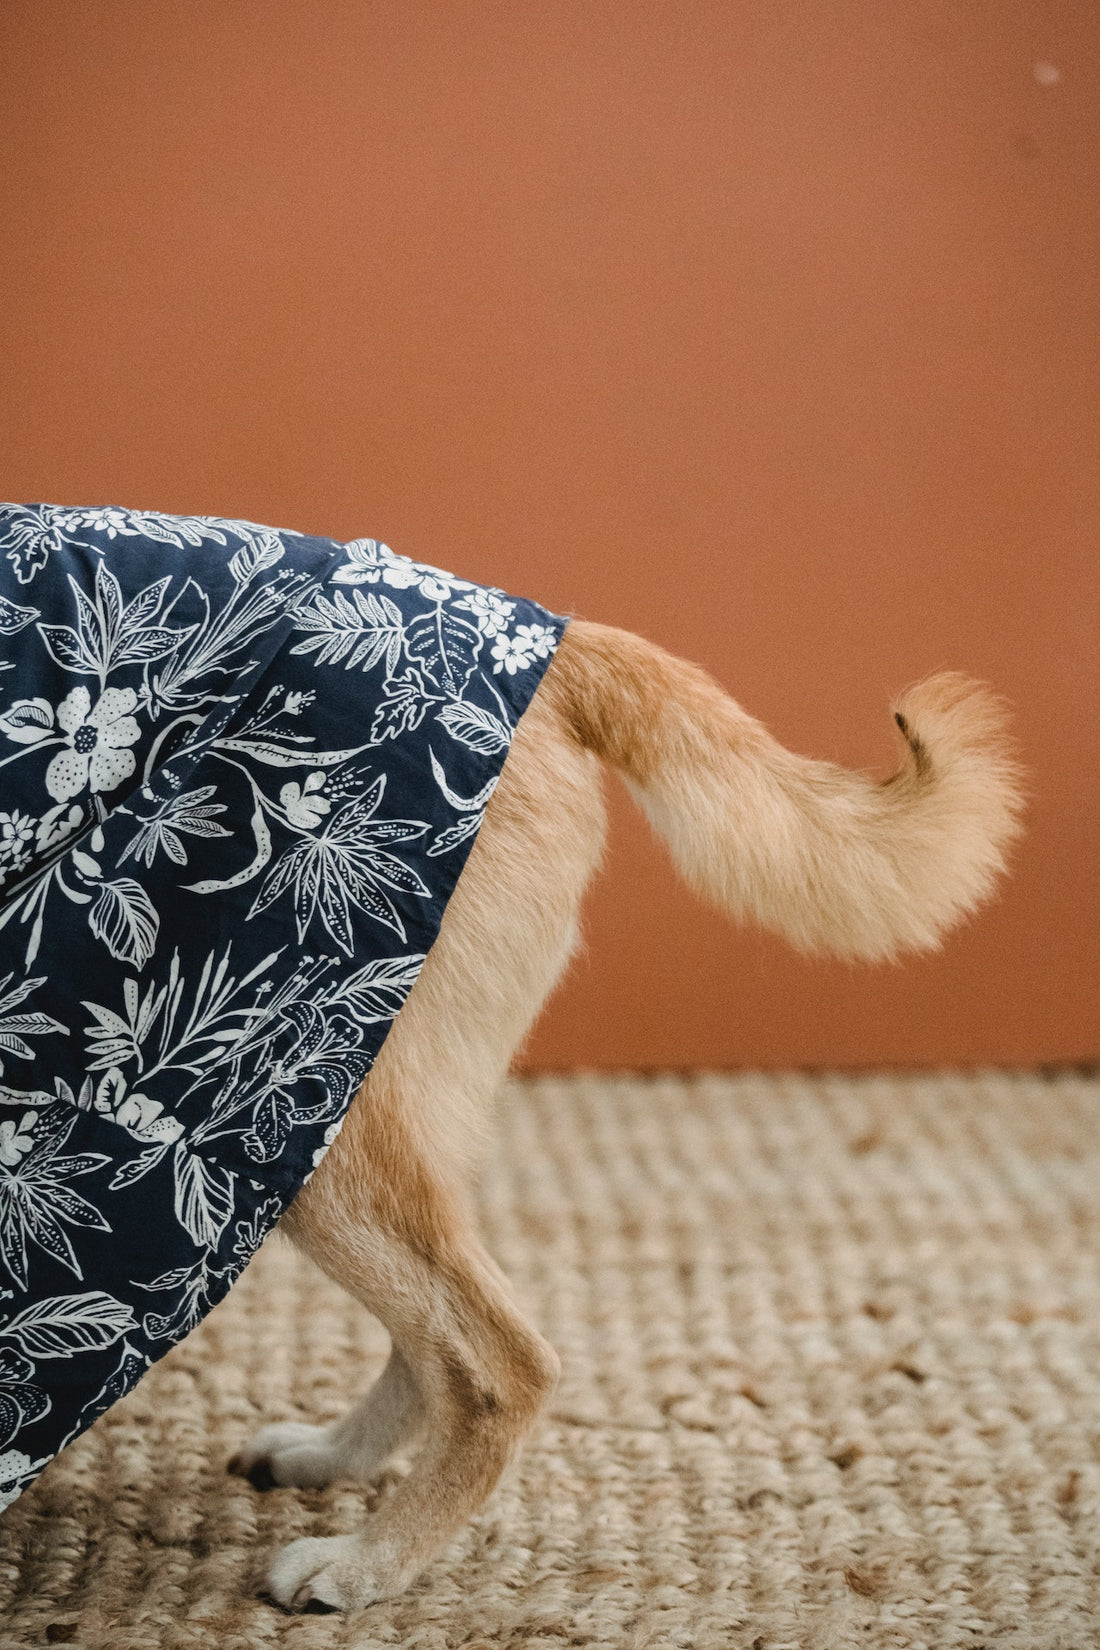 Can Dogs Control Their Tails?